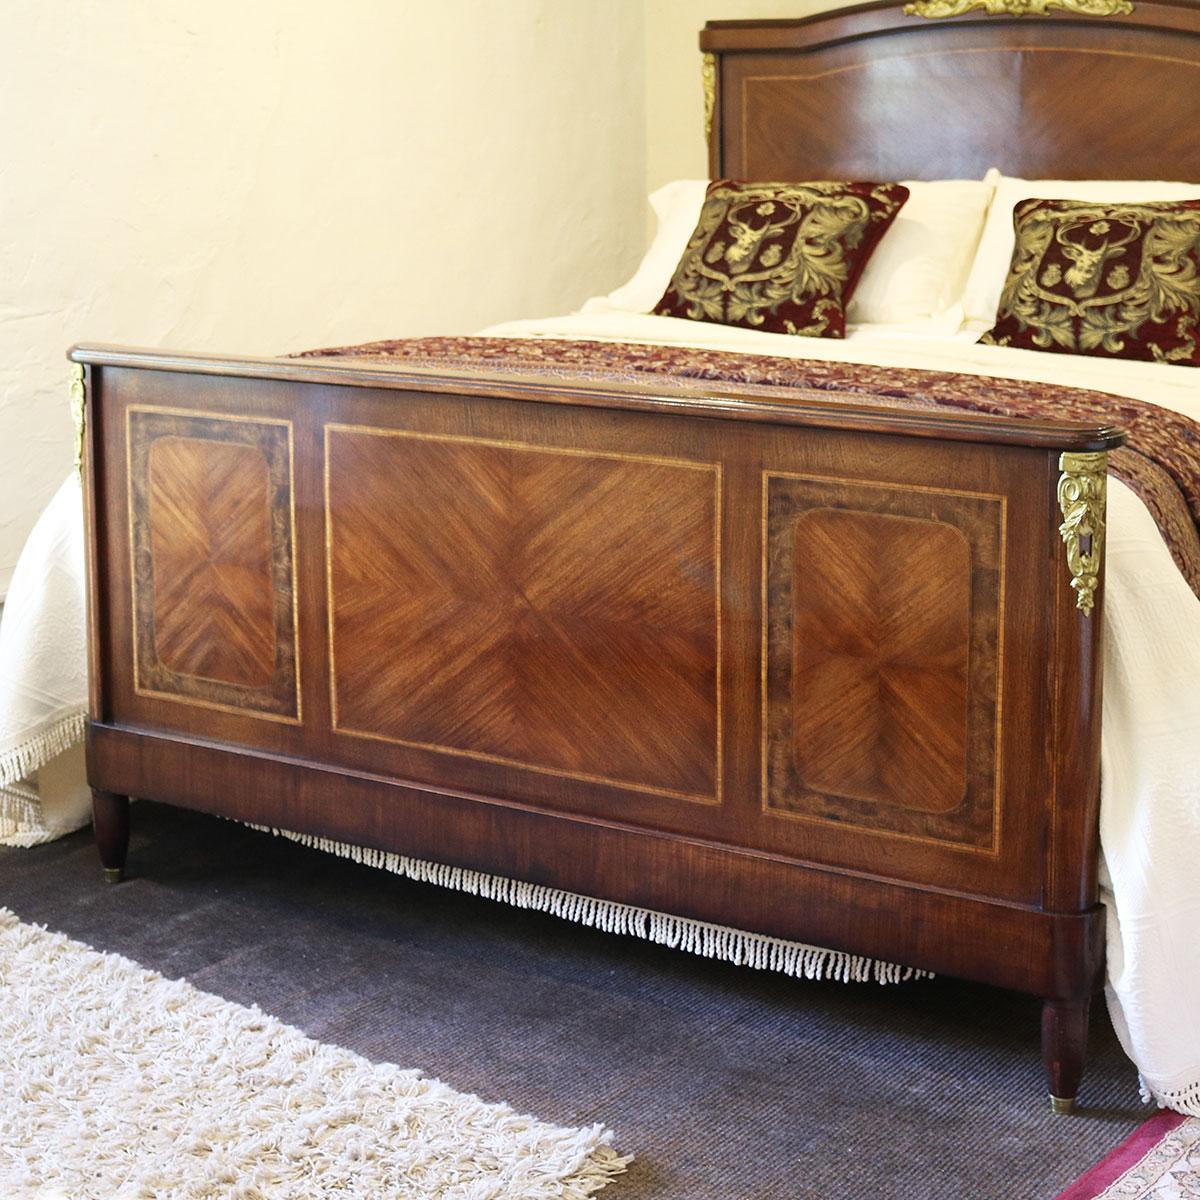 Inlaid Empire Style Antique Bed 1